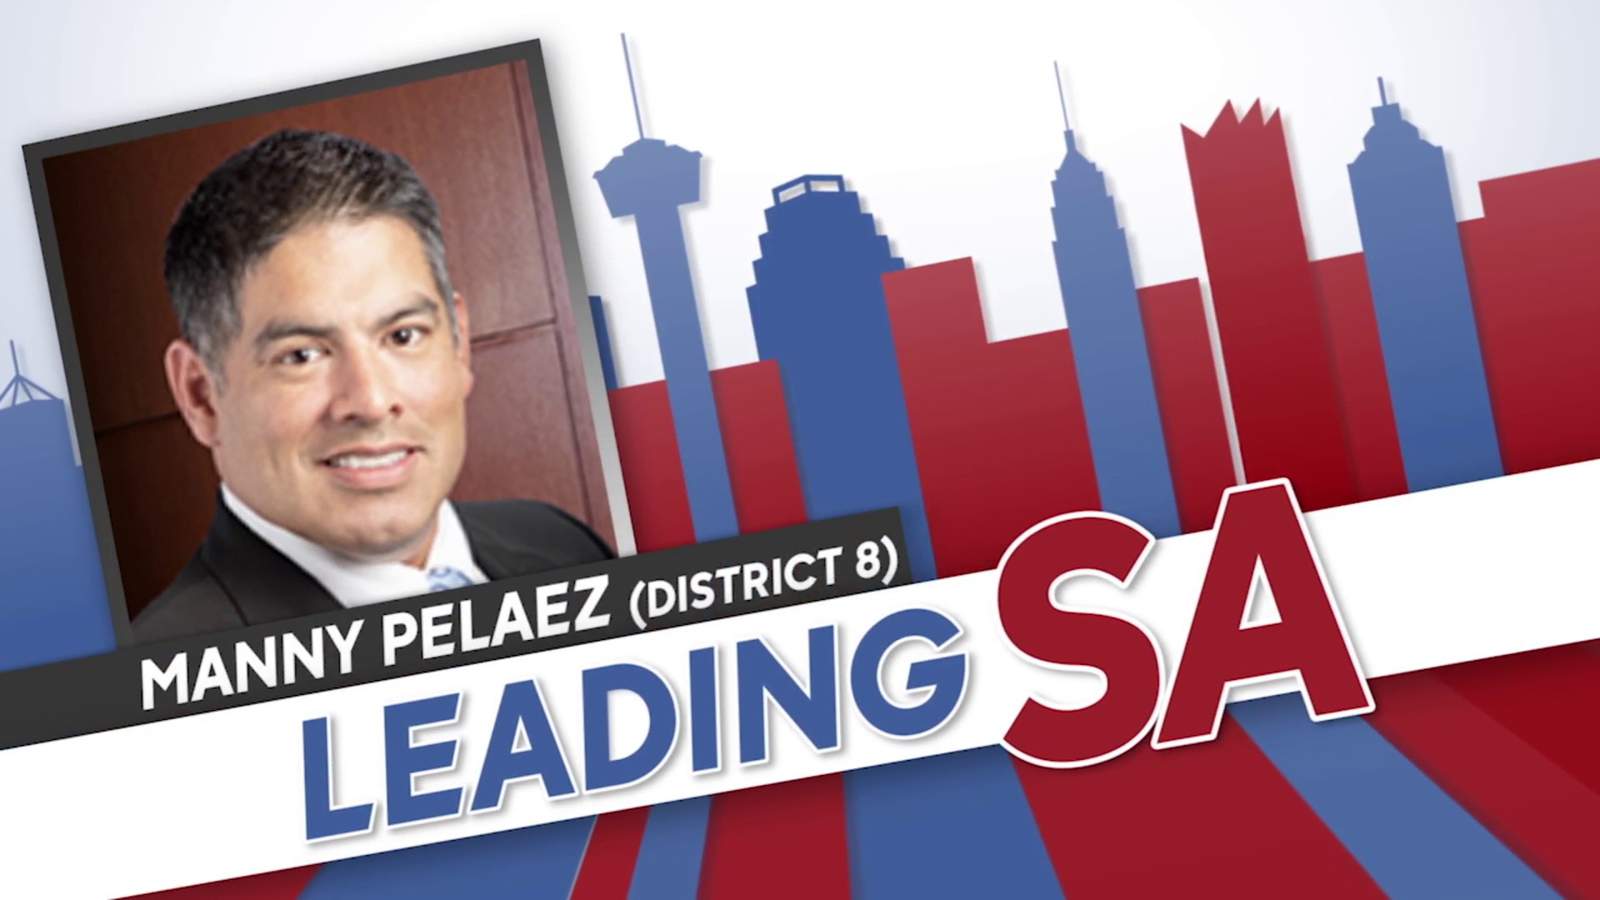 LEADING S.A: District 8 Councilman Manny Pelaez on topics from domestic violence to development, preserving natural resources